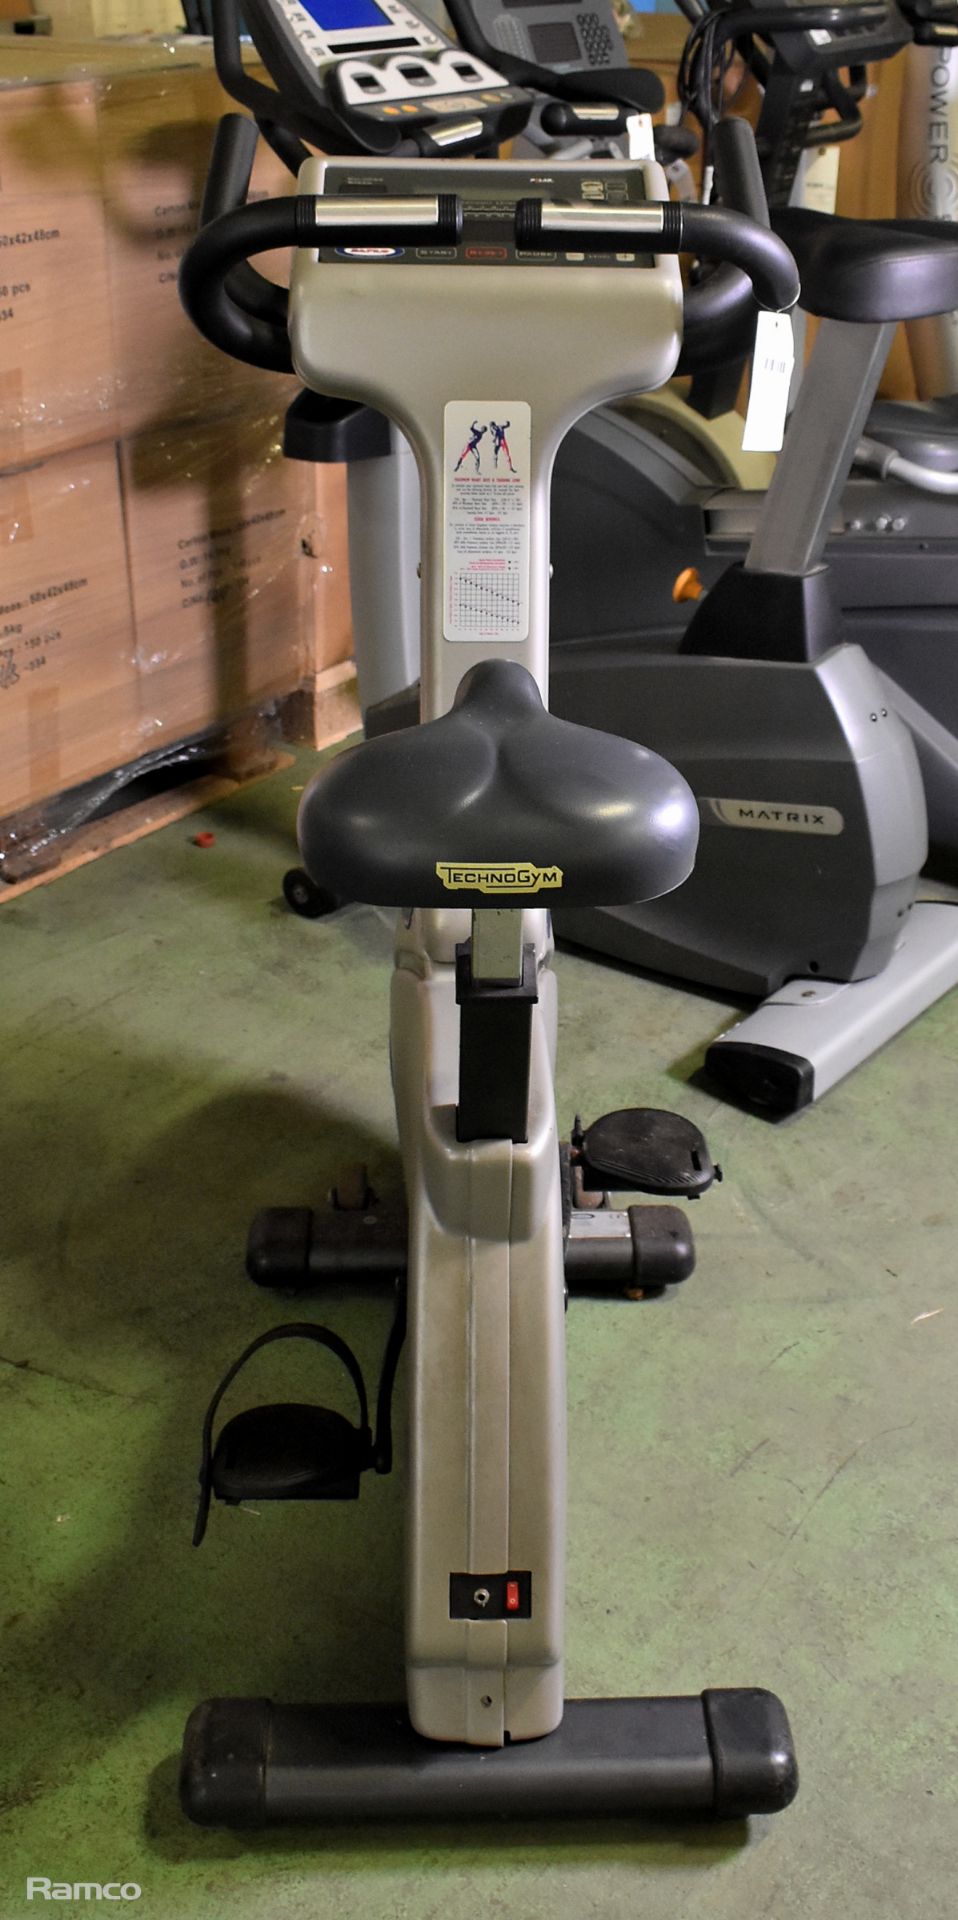 Sapilo WorkActive exercise bike - L 110 x W 48 x H 120cm - with Technogym seat - Image 8 of 8